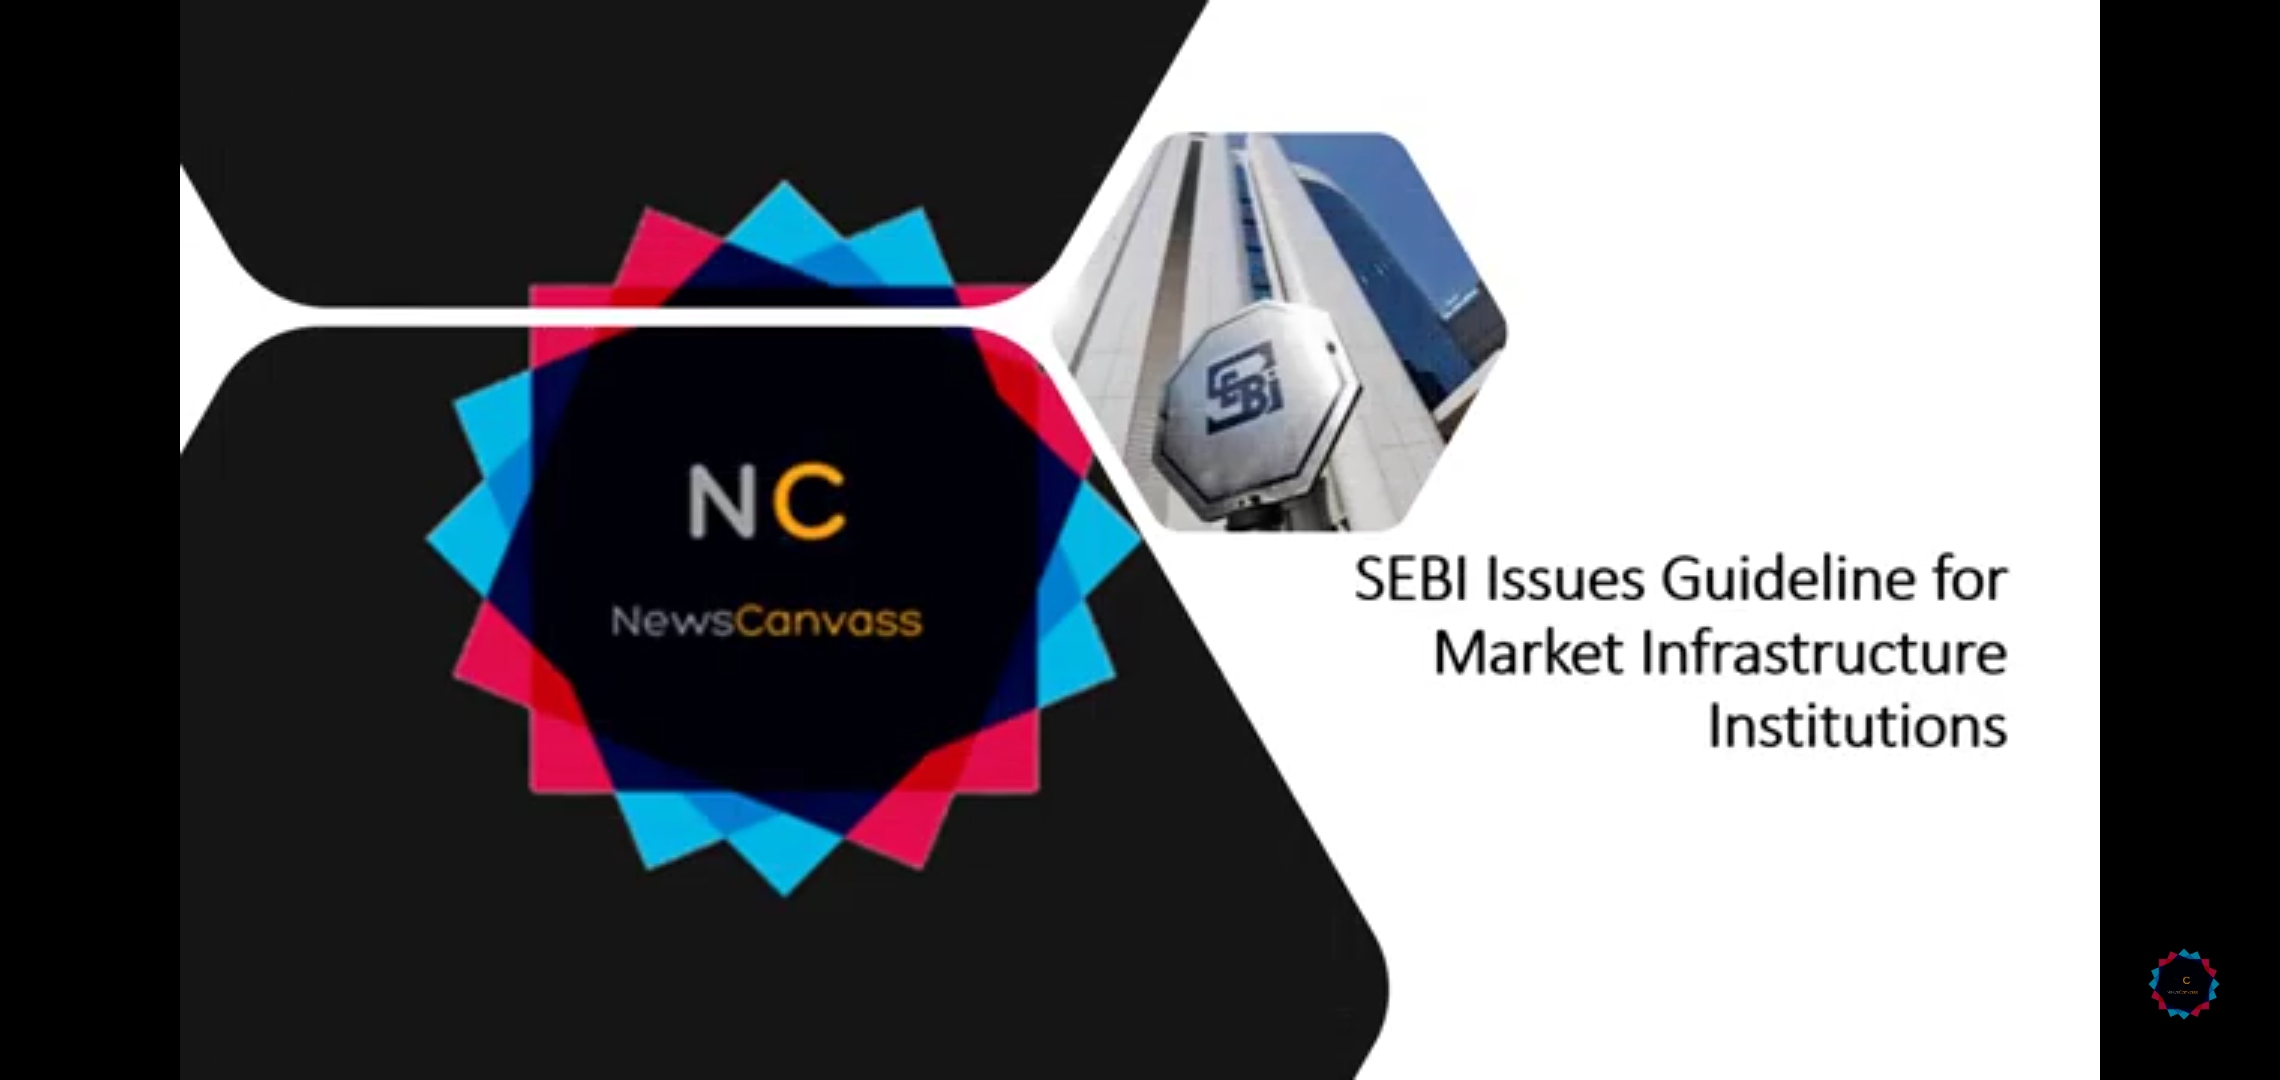 SEBI Issues Guidelines for Market Infrastructure Institutions